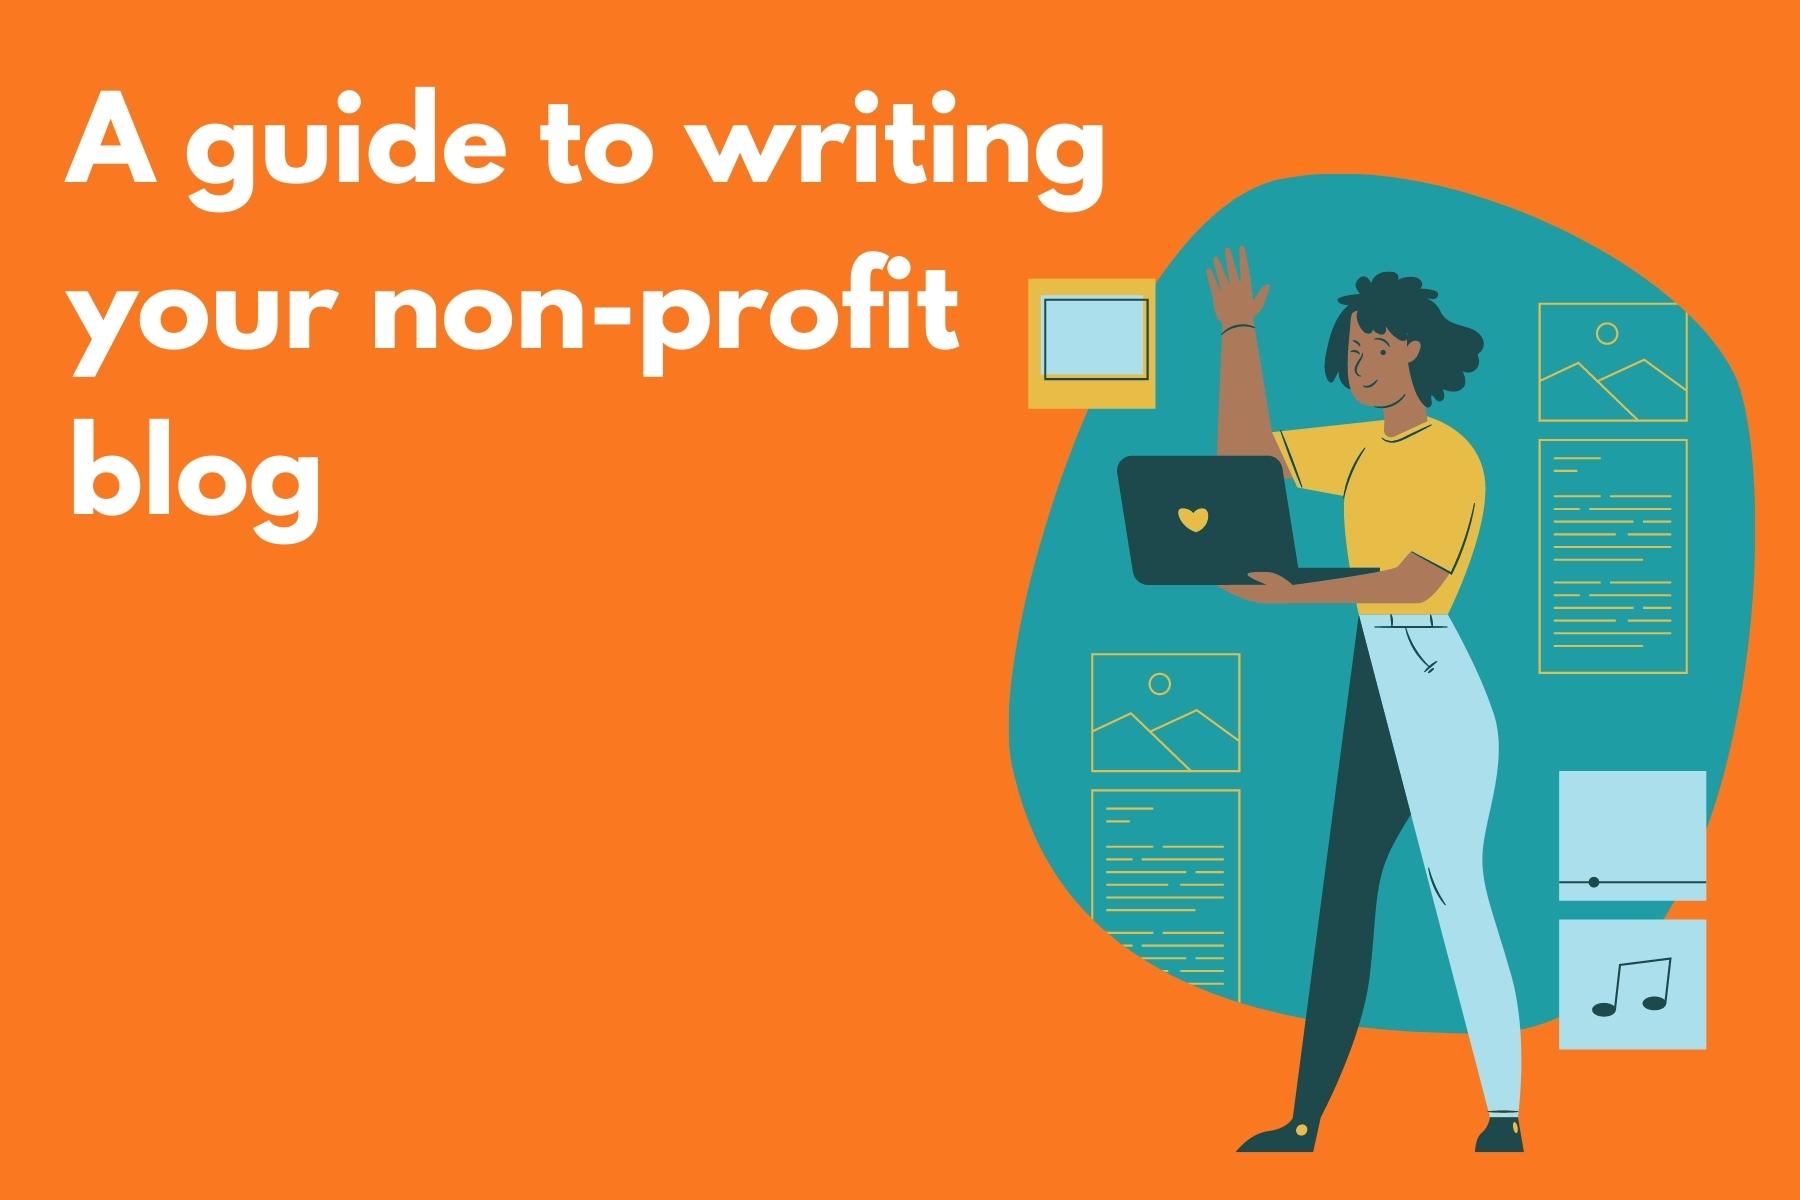 A guide to writing your non-profit blog